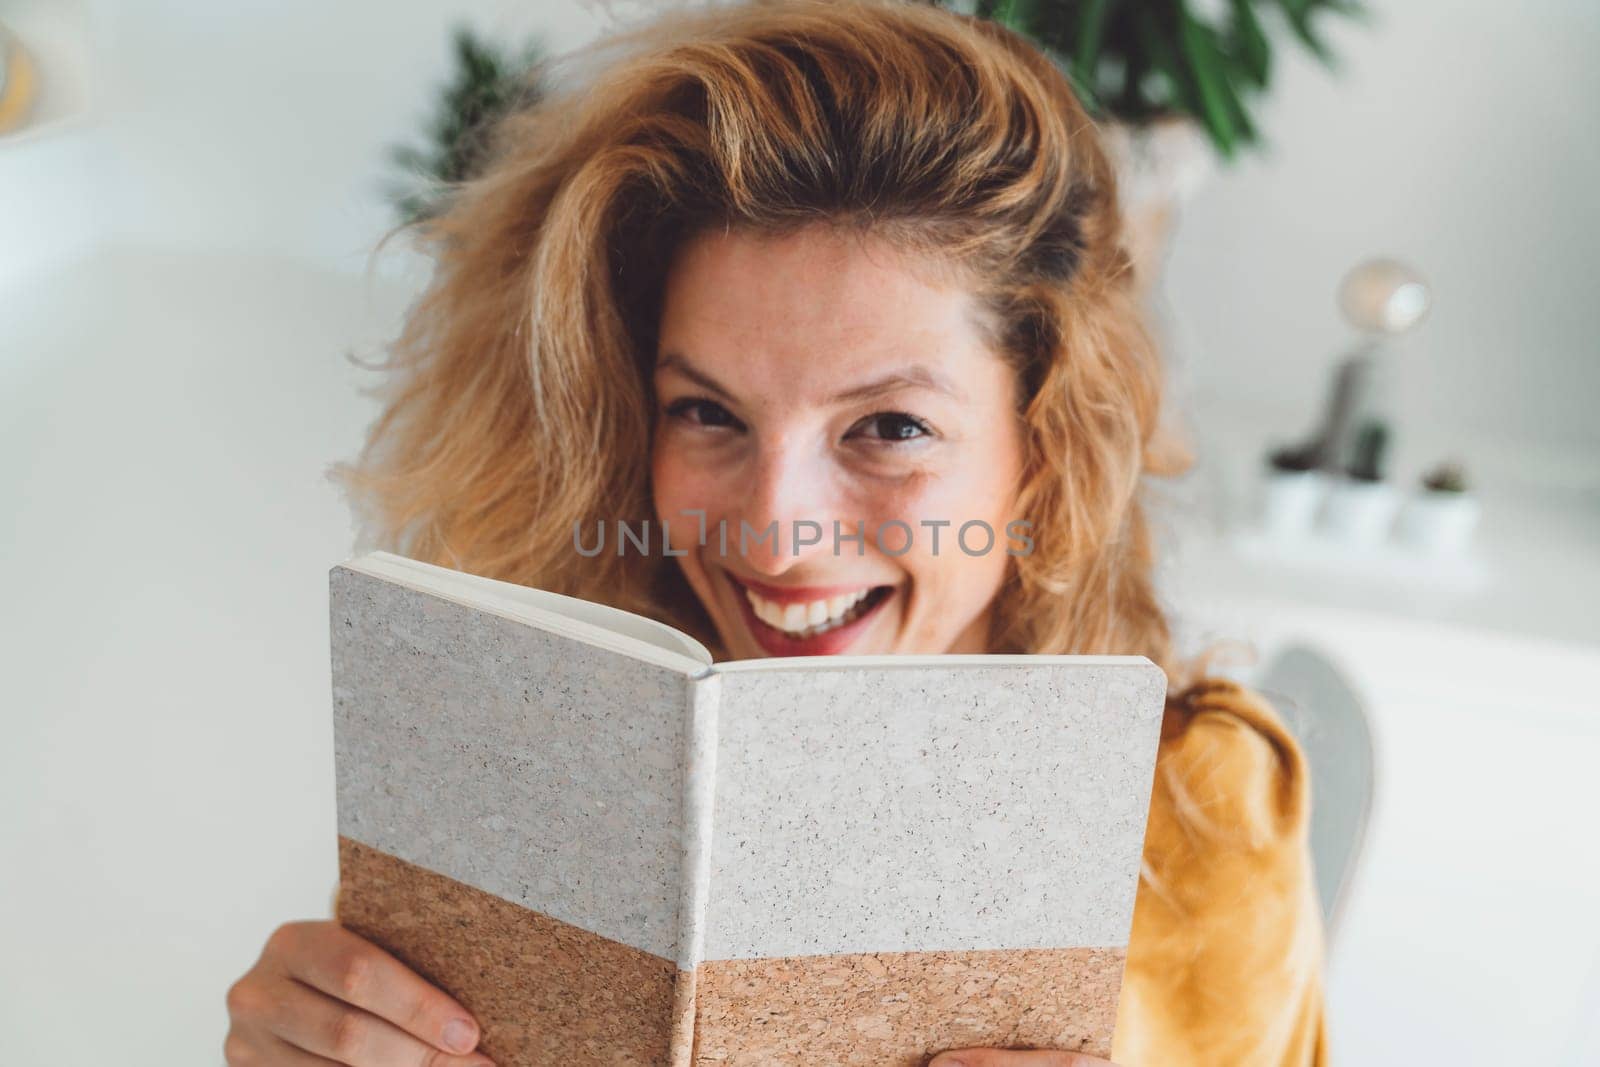 Waist up portrait of a smiling woman hiding behind her notebook by VisualProductions